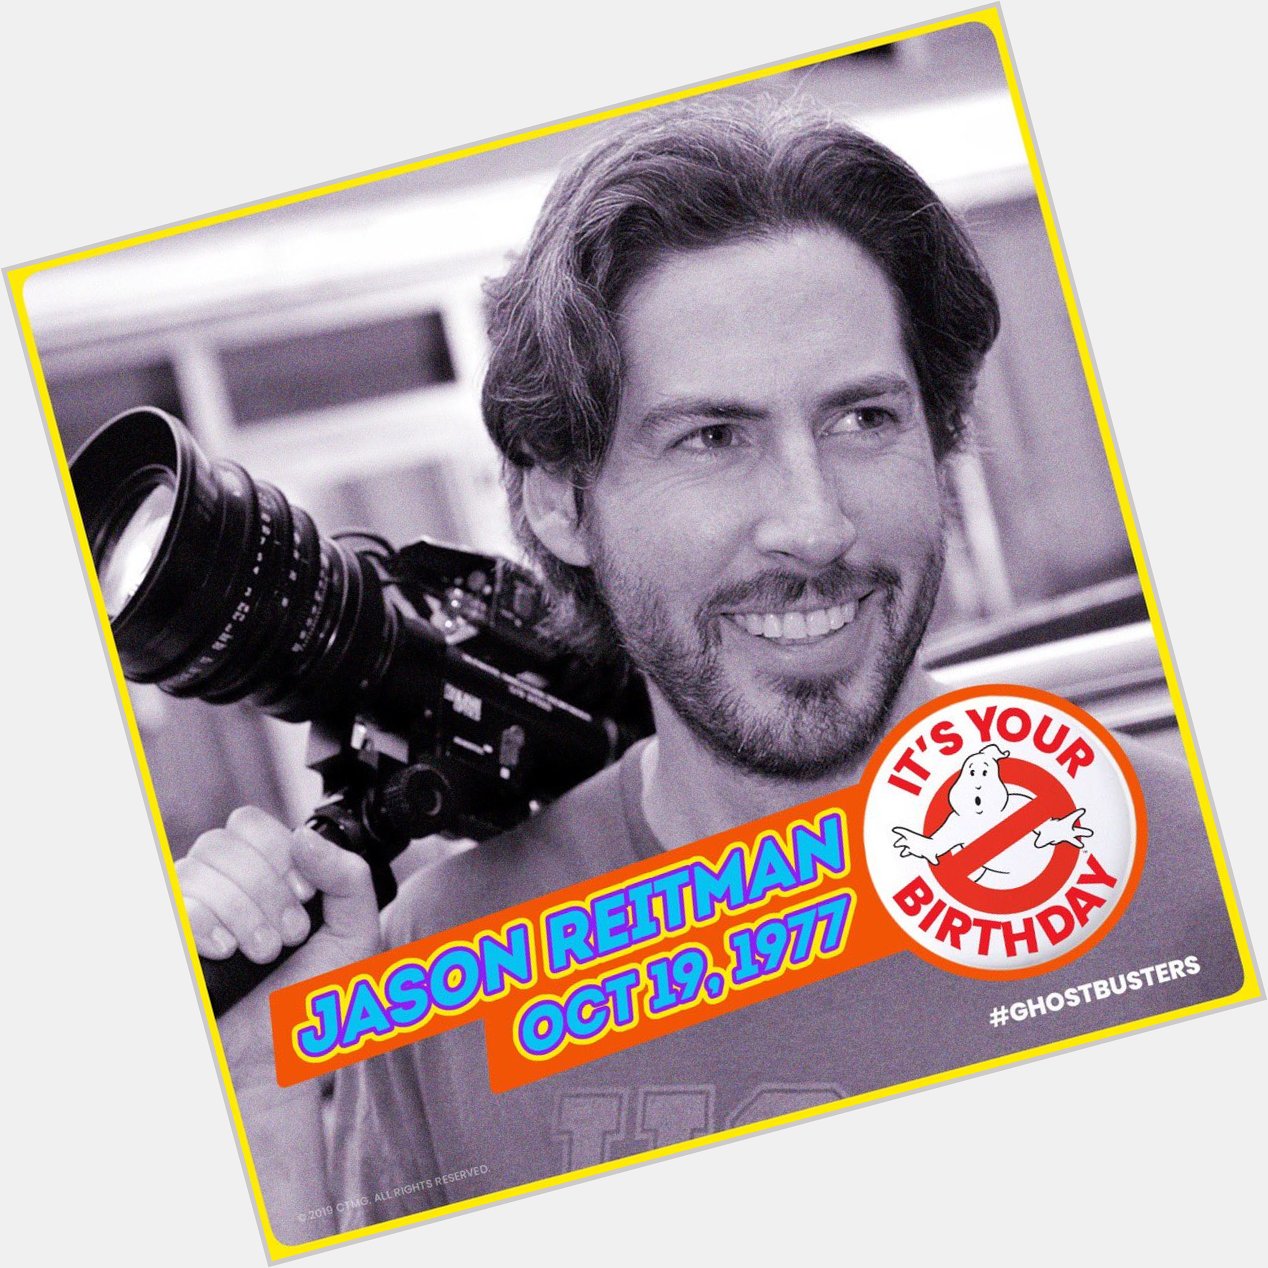 Happy Birthday to Jason Reitman for giving us the gift of 